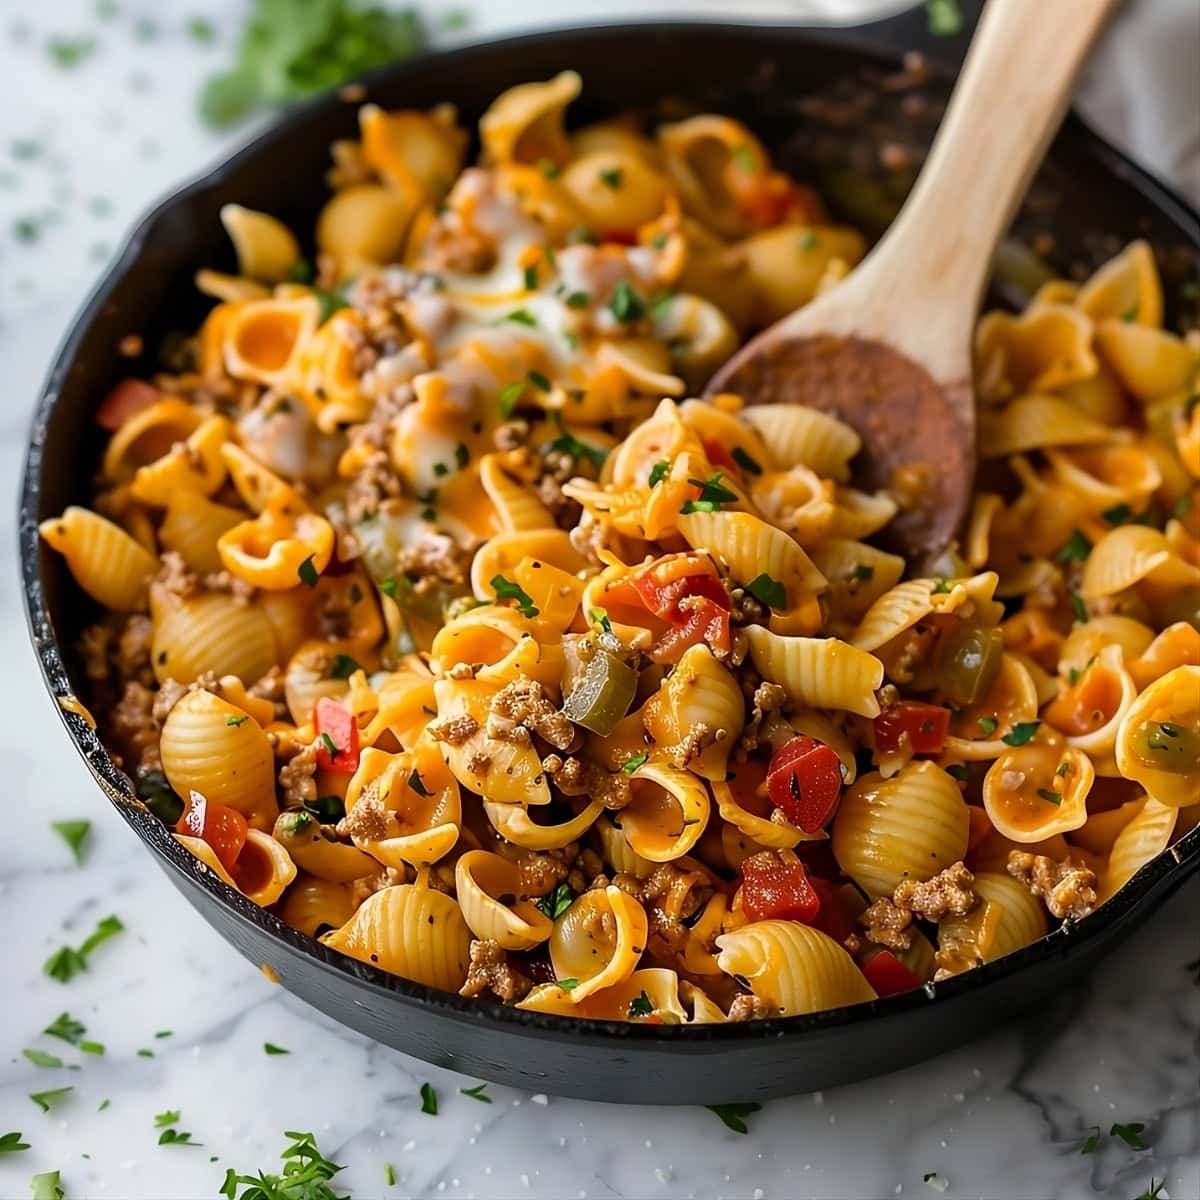 Taco pasta tossed in skillet pan with a wooden ladle.